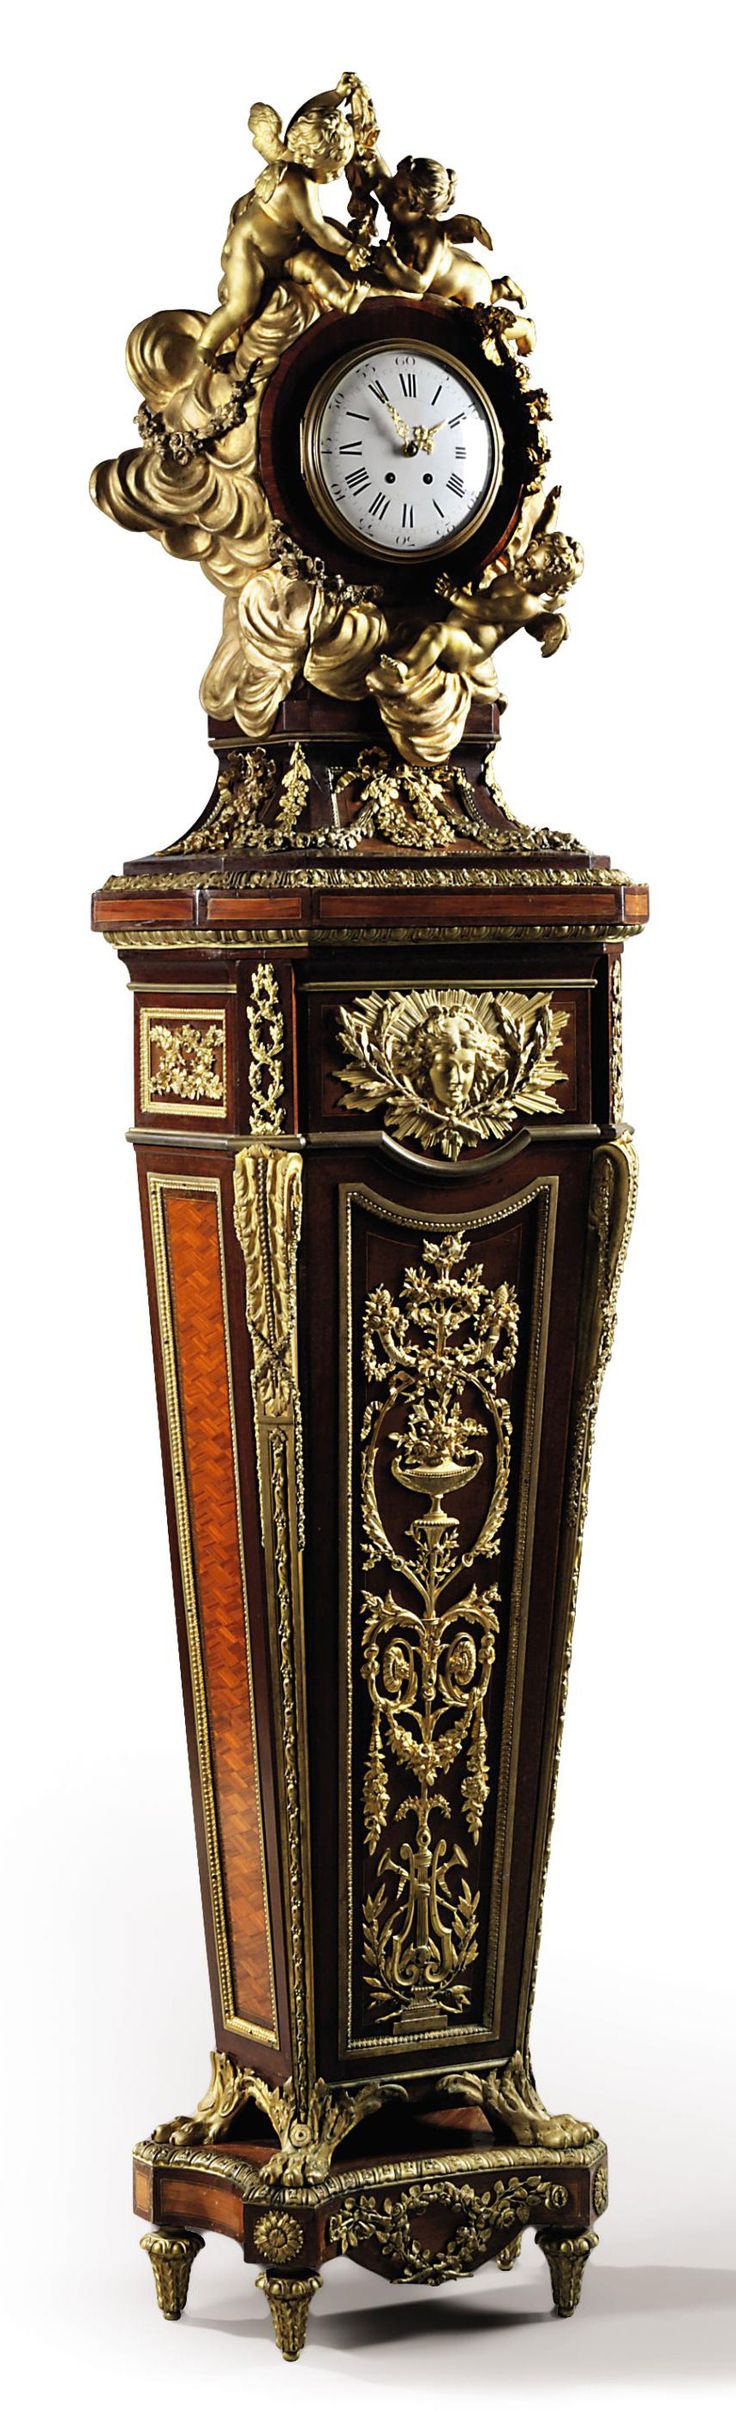 date unspecified A FRENCH ORMOLU-MOUNTED AMARANTH AND TULIPWOOD PARQUETRY PEDEST...